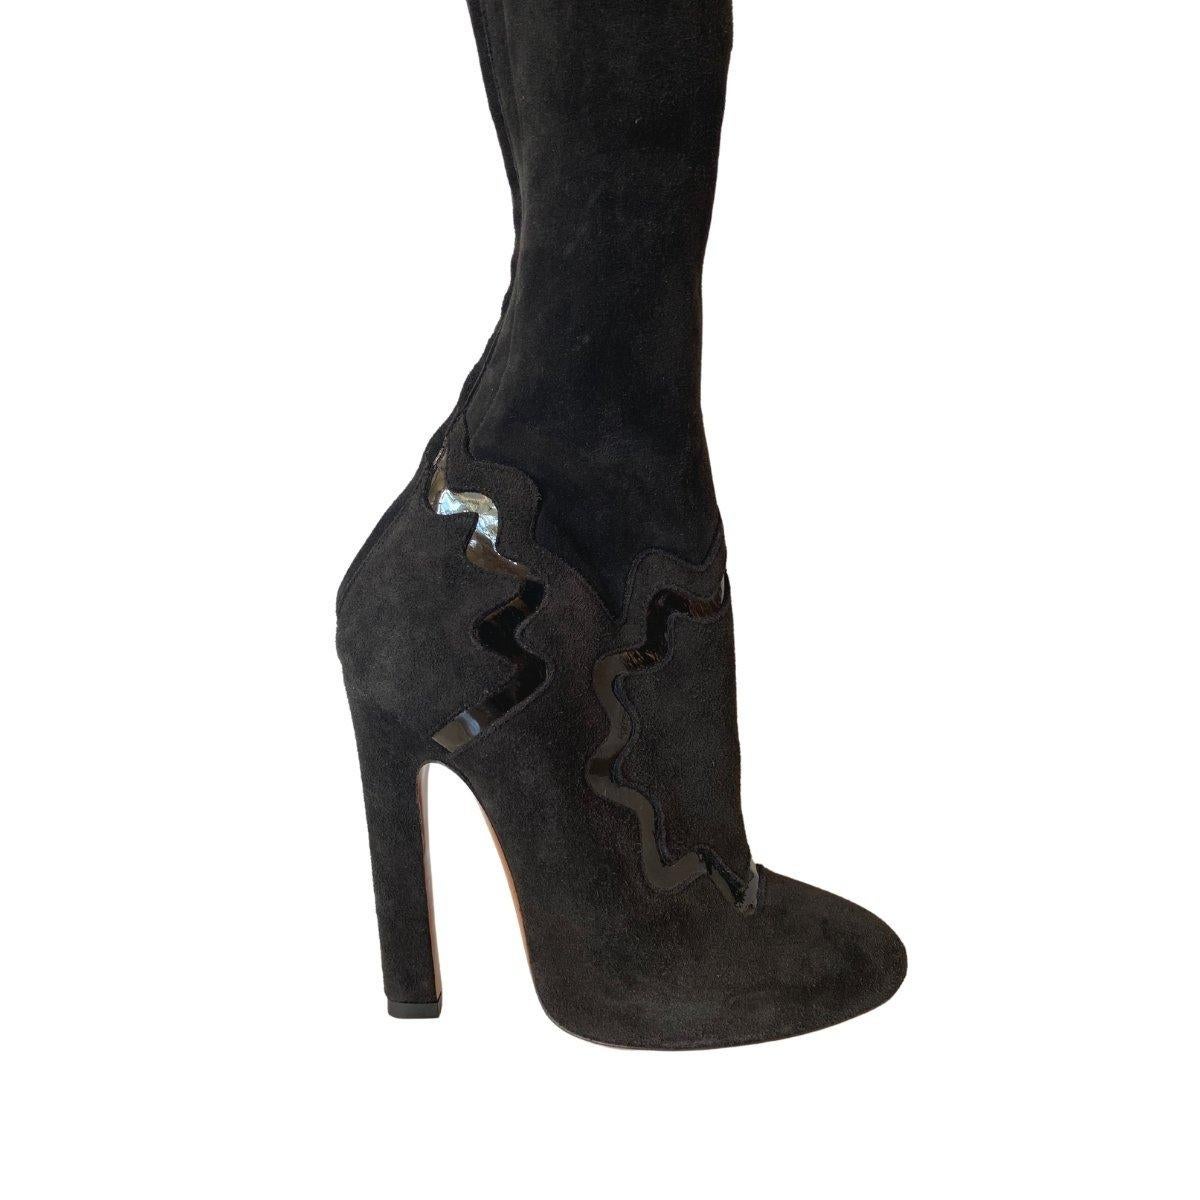 Crafted in Italy, Alaïa's black suede pair is backed in a stretch fabric for the perfect streamlined fit. The comfortable elasticated top ensures they stay in place all day.
Soft leather boots with patent leather applications.
Solid color
Narrow toe